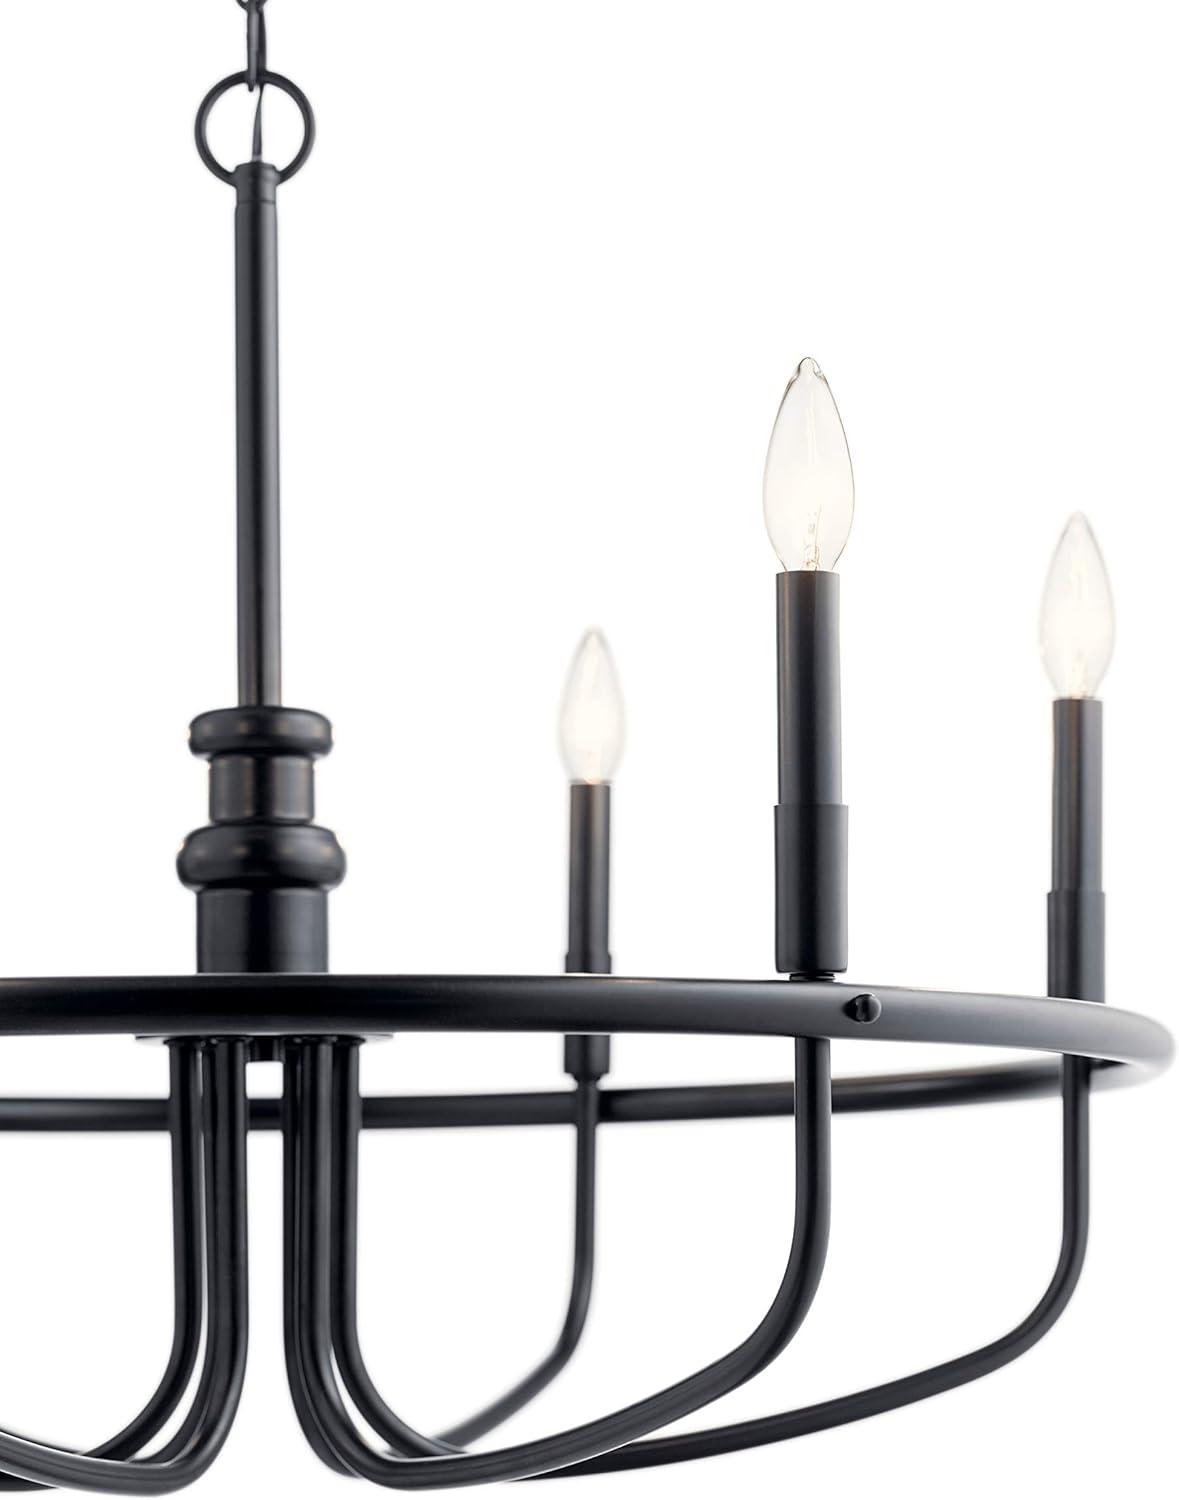 Capitol Hill Modern Black 6-Light Chandelier with Candle Sleeves